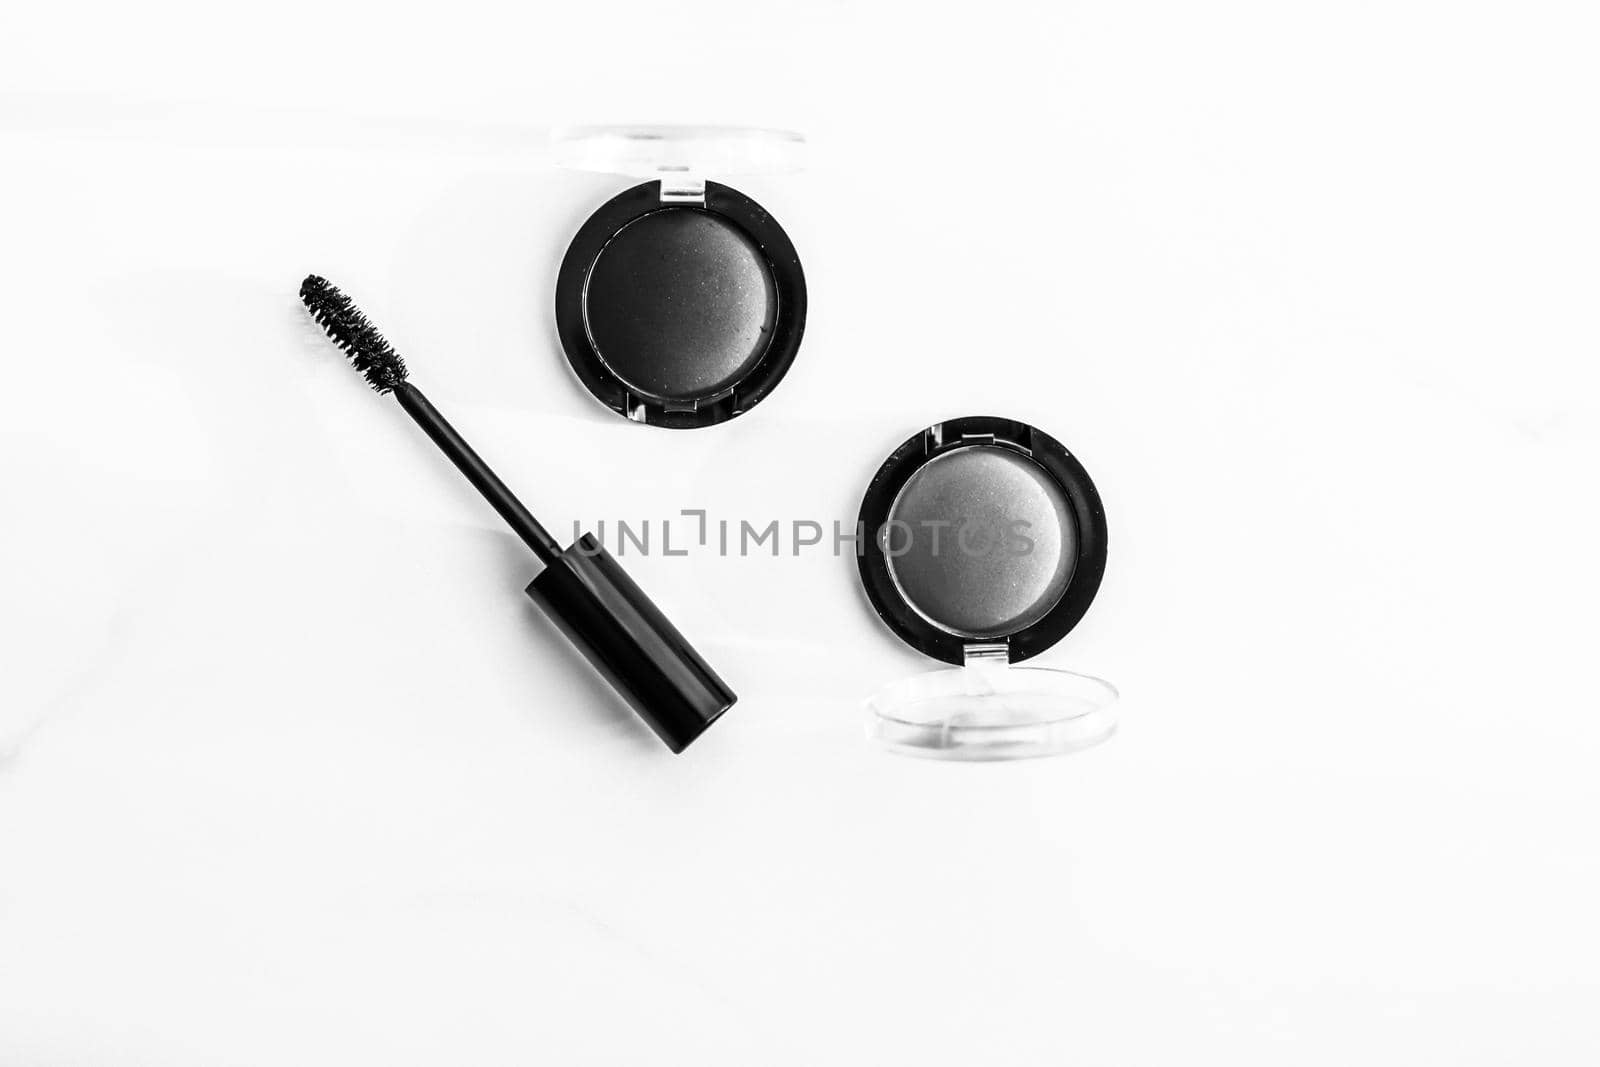 Cosmetic branding, blog and girly concept - Eyeshadows, black liner and mascara on marble background, eye shadows cosmetics as glamour make-up products for luxury beauty brand, holiday flatlay design